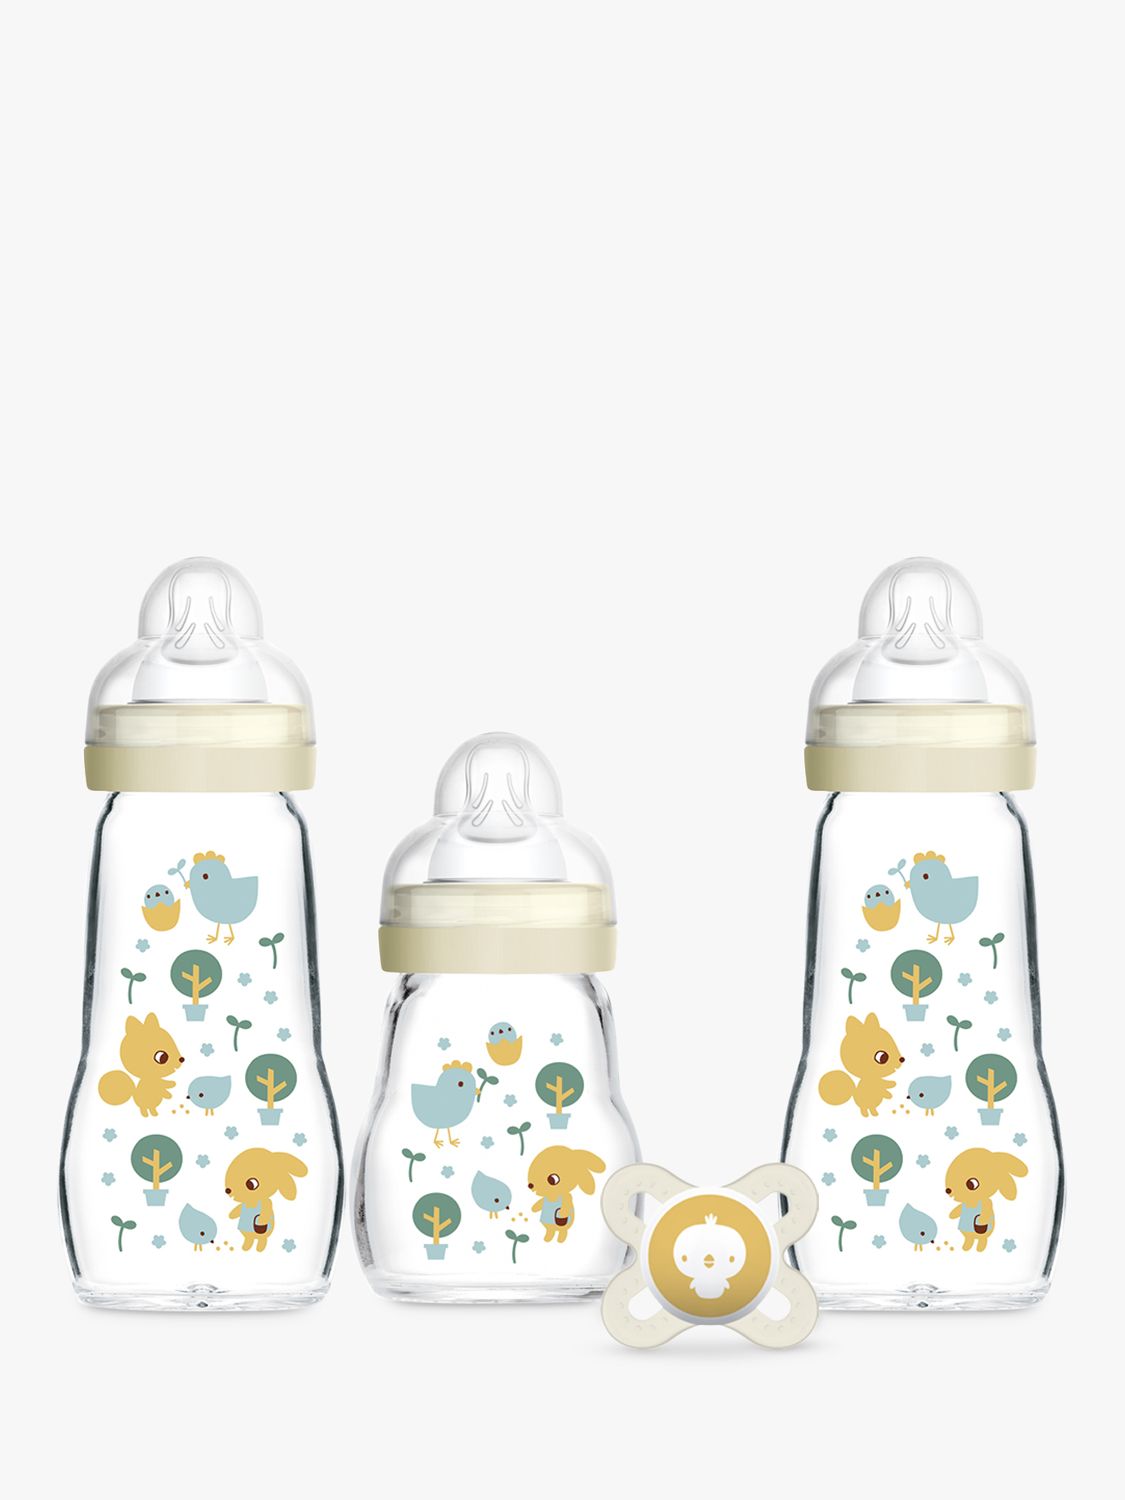 How to clean your BIBS Baby Glass Bottle